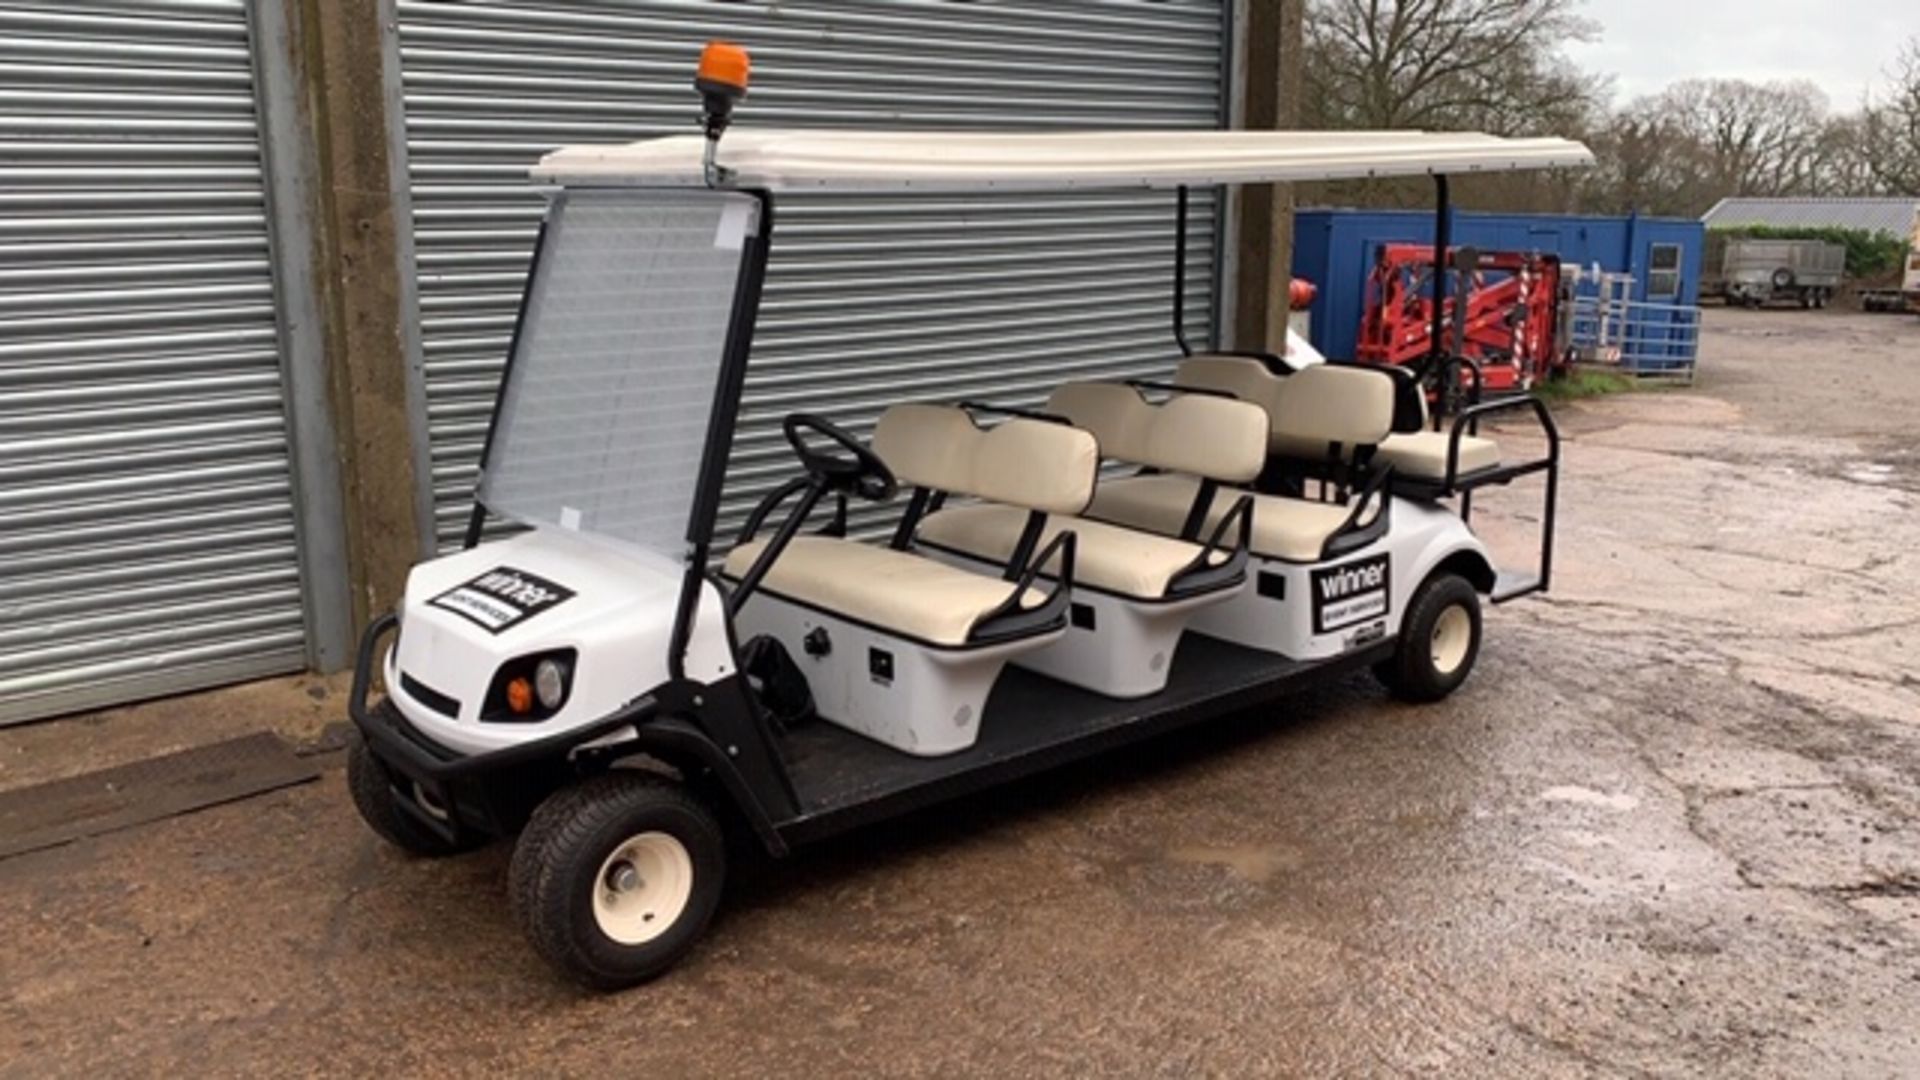 CUSHMAN EZGO SHUTTLE 8 PETROL ENGINED 8 SEATER GOLF / EVENTS BUGGY. YEAR 2017 BUILD. DIRECT FROM